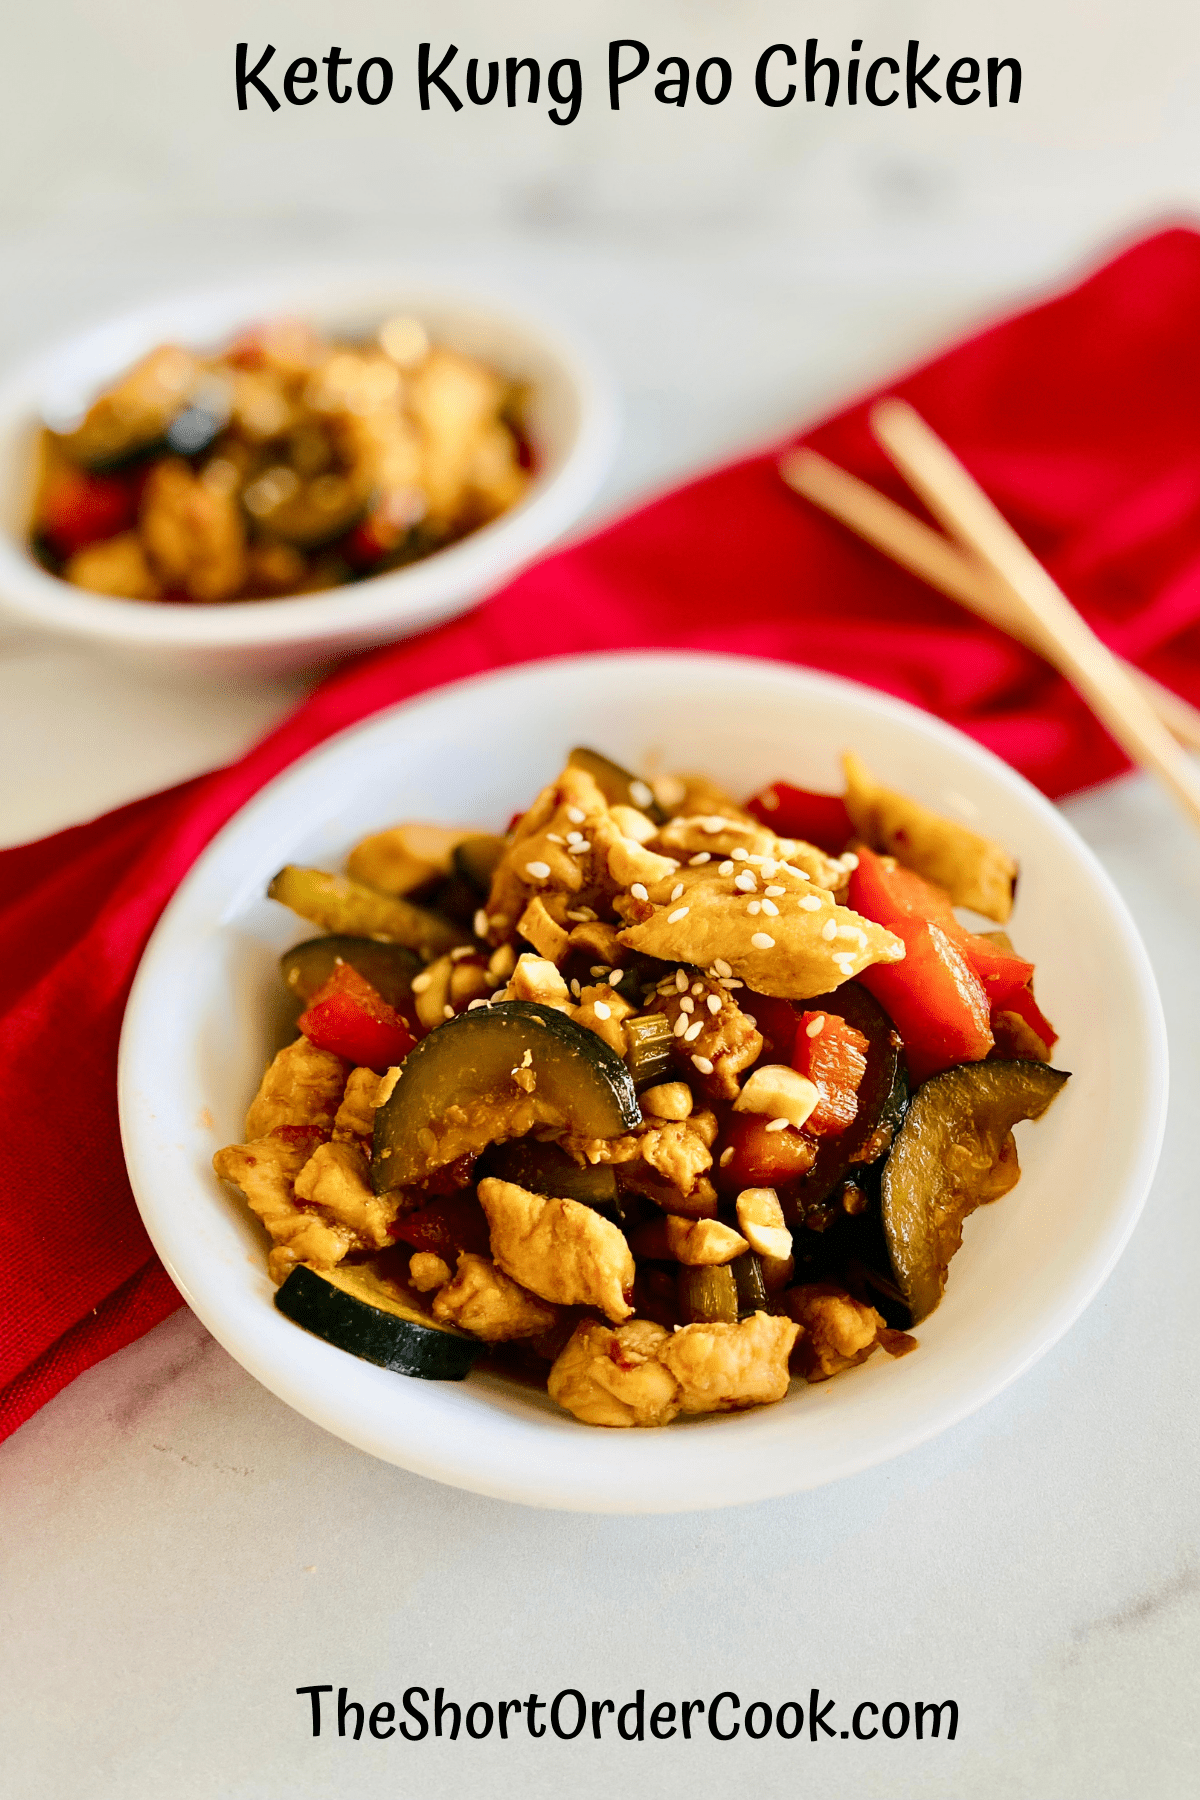 Keto Kung Pao Chicken in two white bowls ready to eat with chopsticks